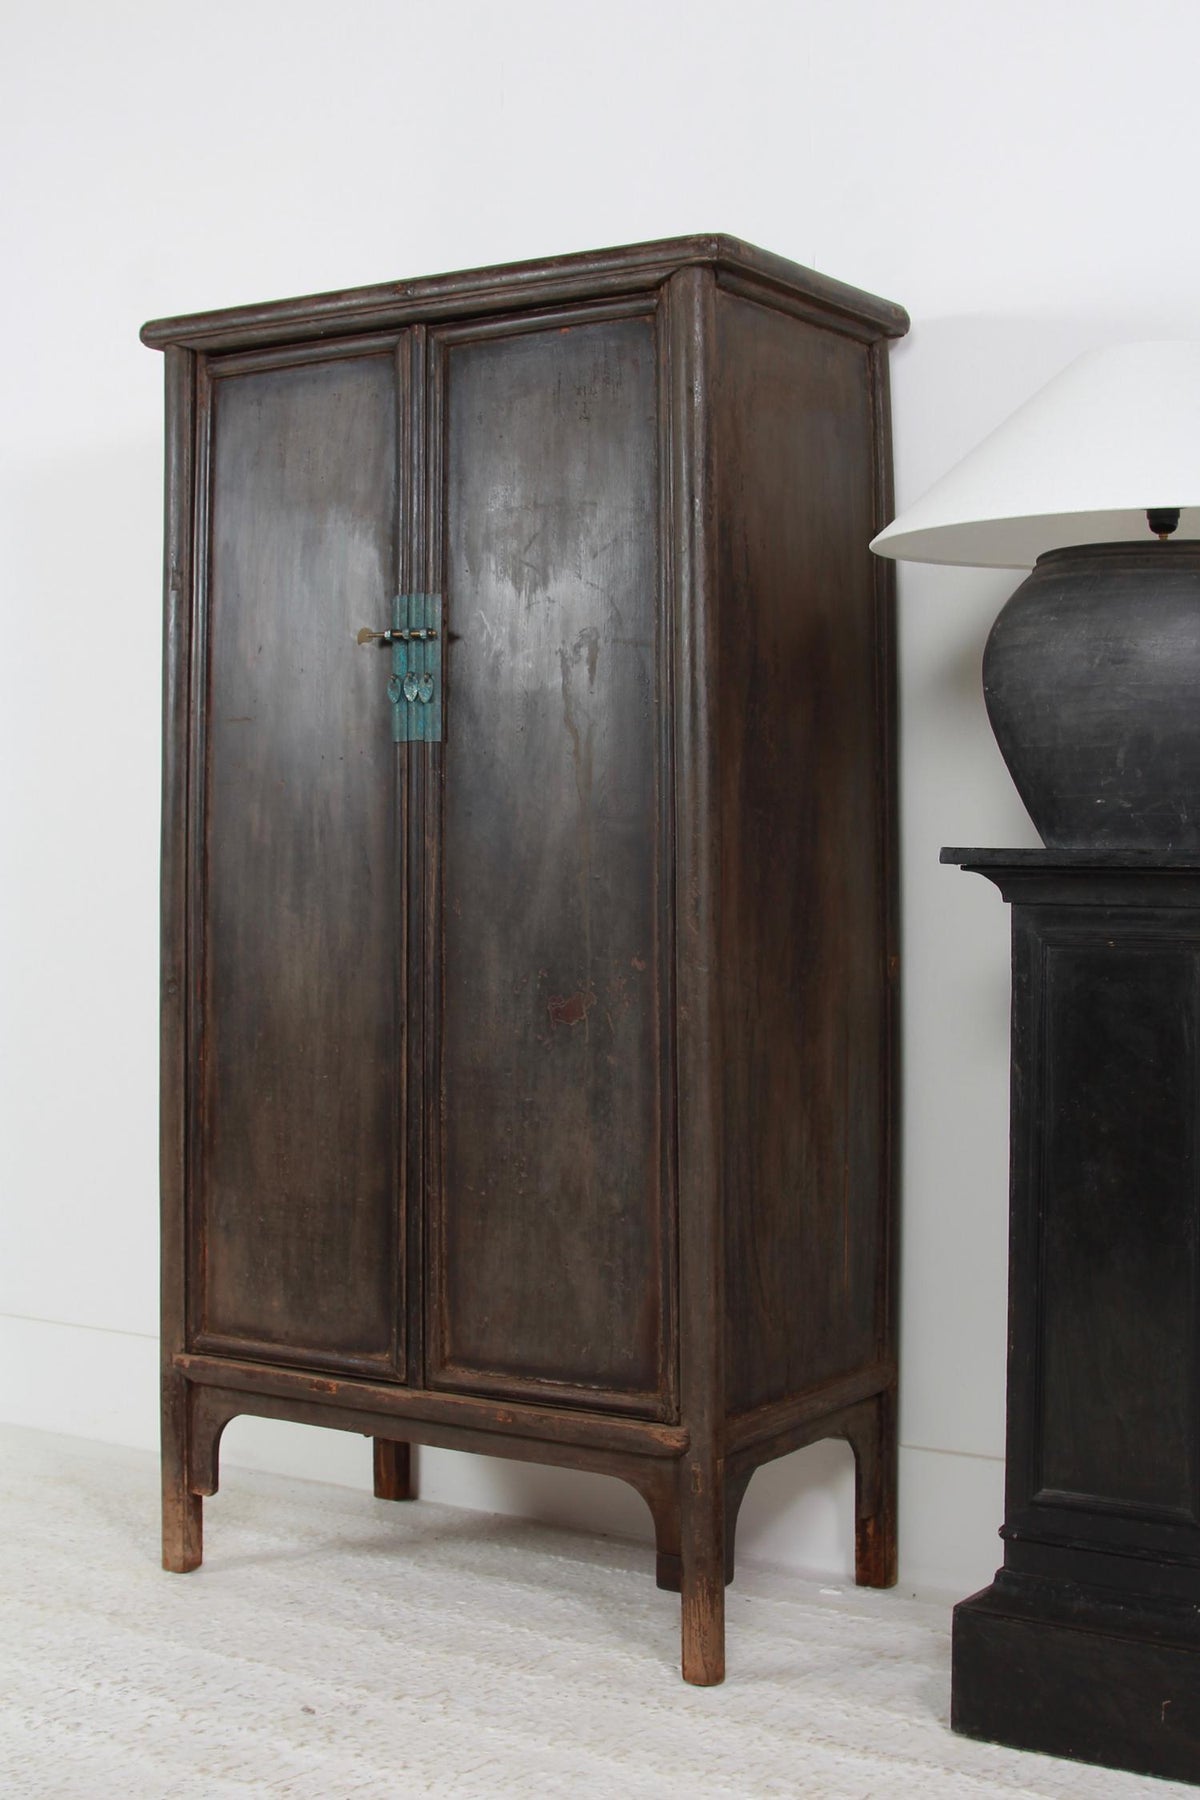 Wonderful Chinese Ming Dynasty Style Scholar's Cabinet